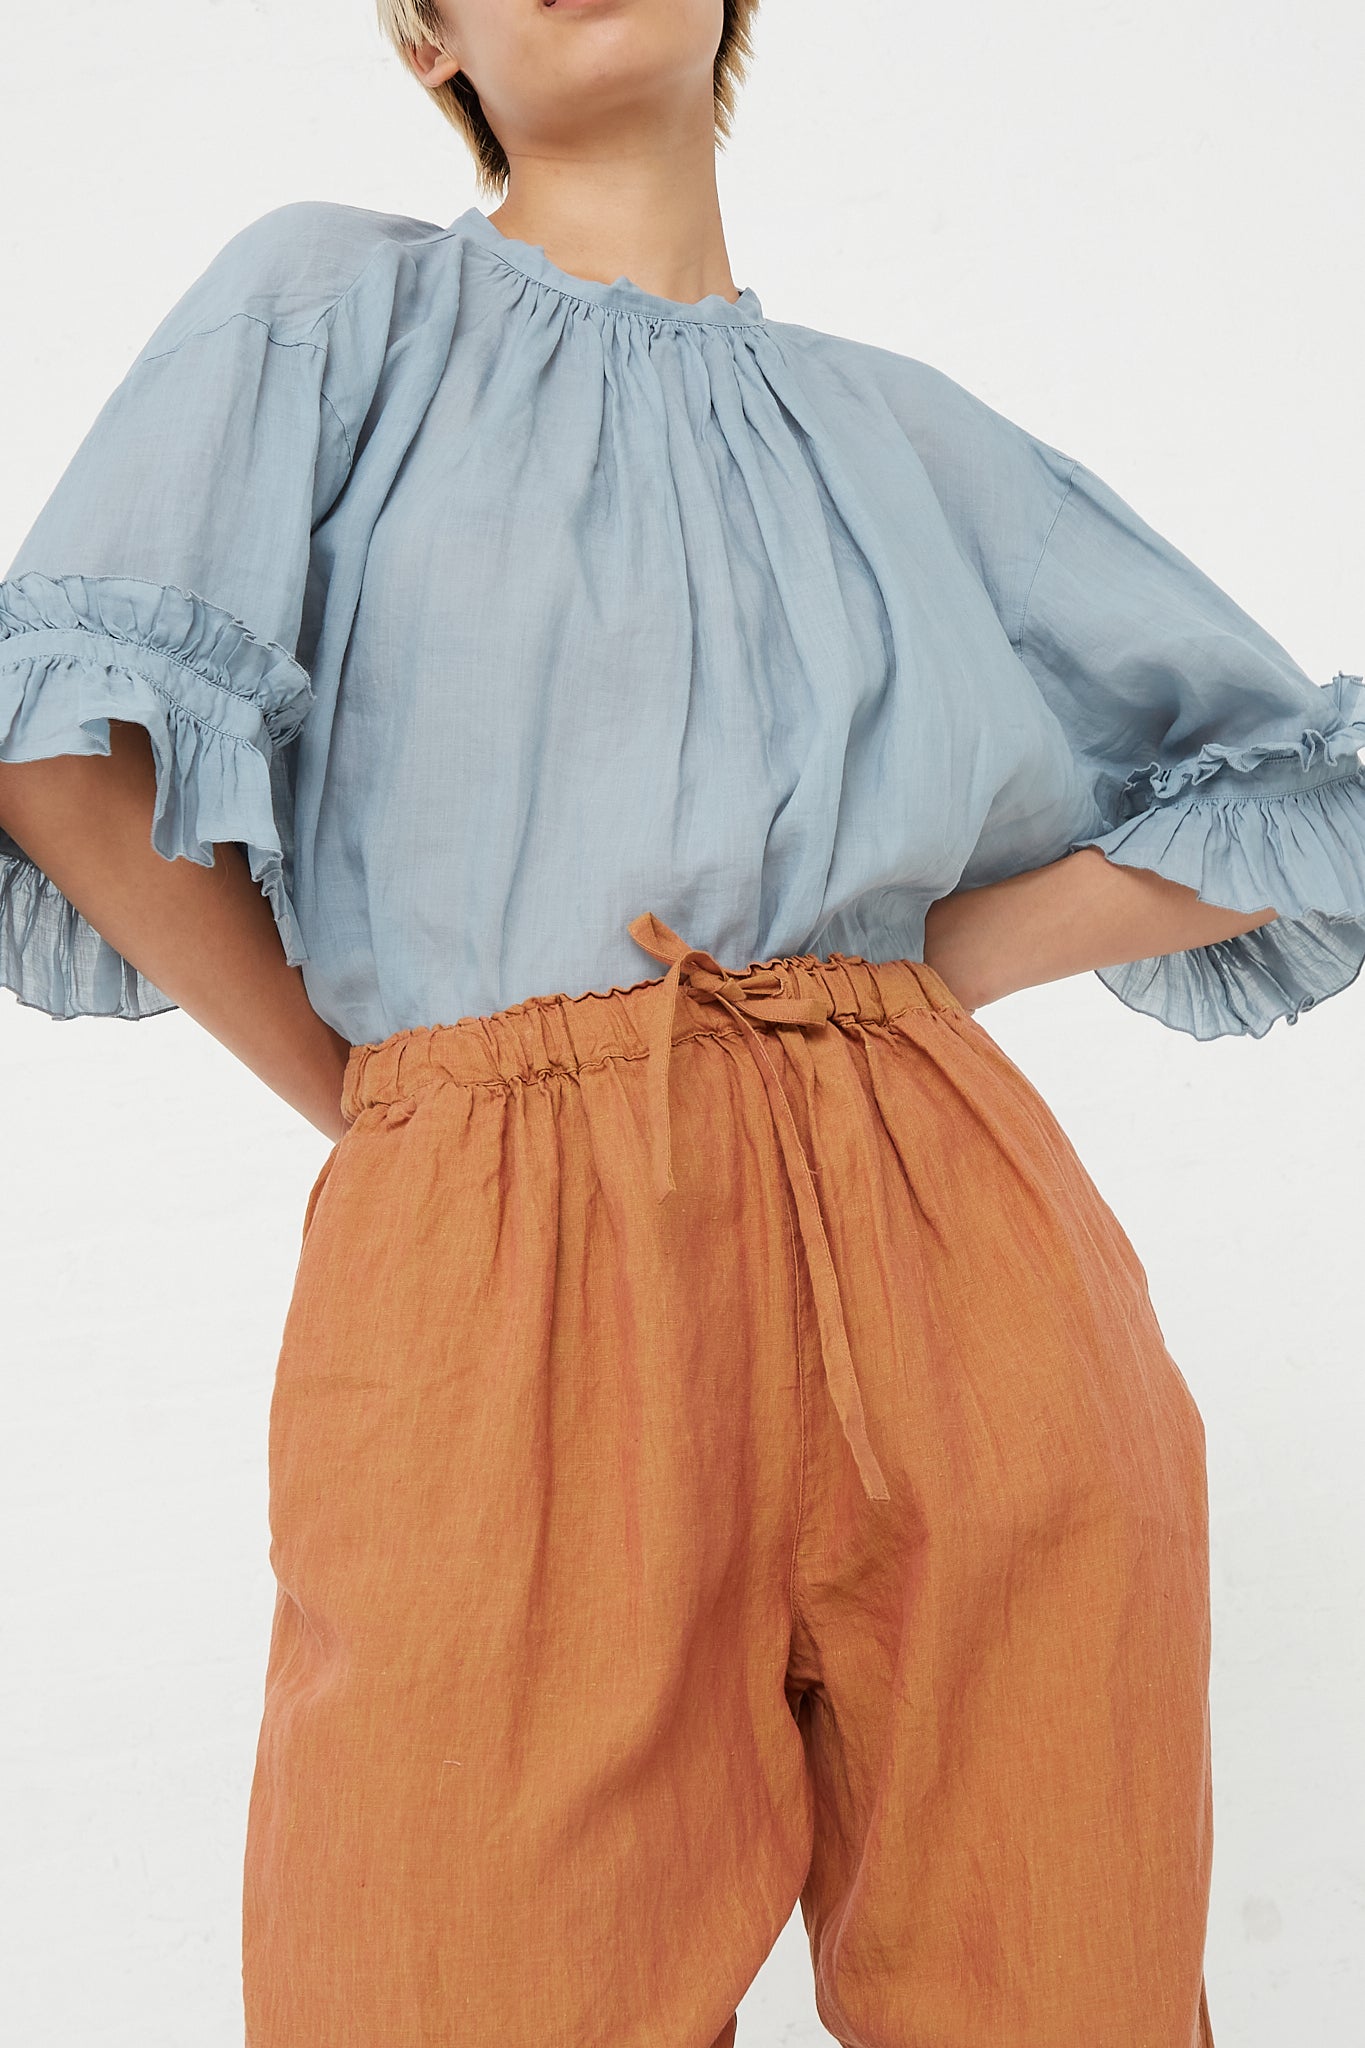 nest Robe - Hemp Yarn Dyed Easy Fit Pant in Brick front waistband detail